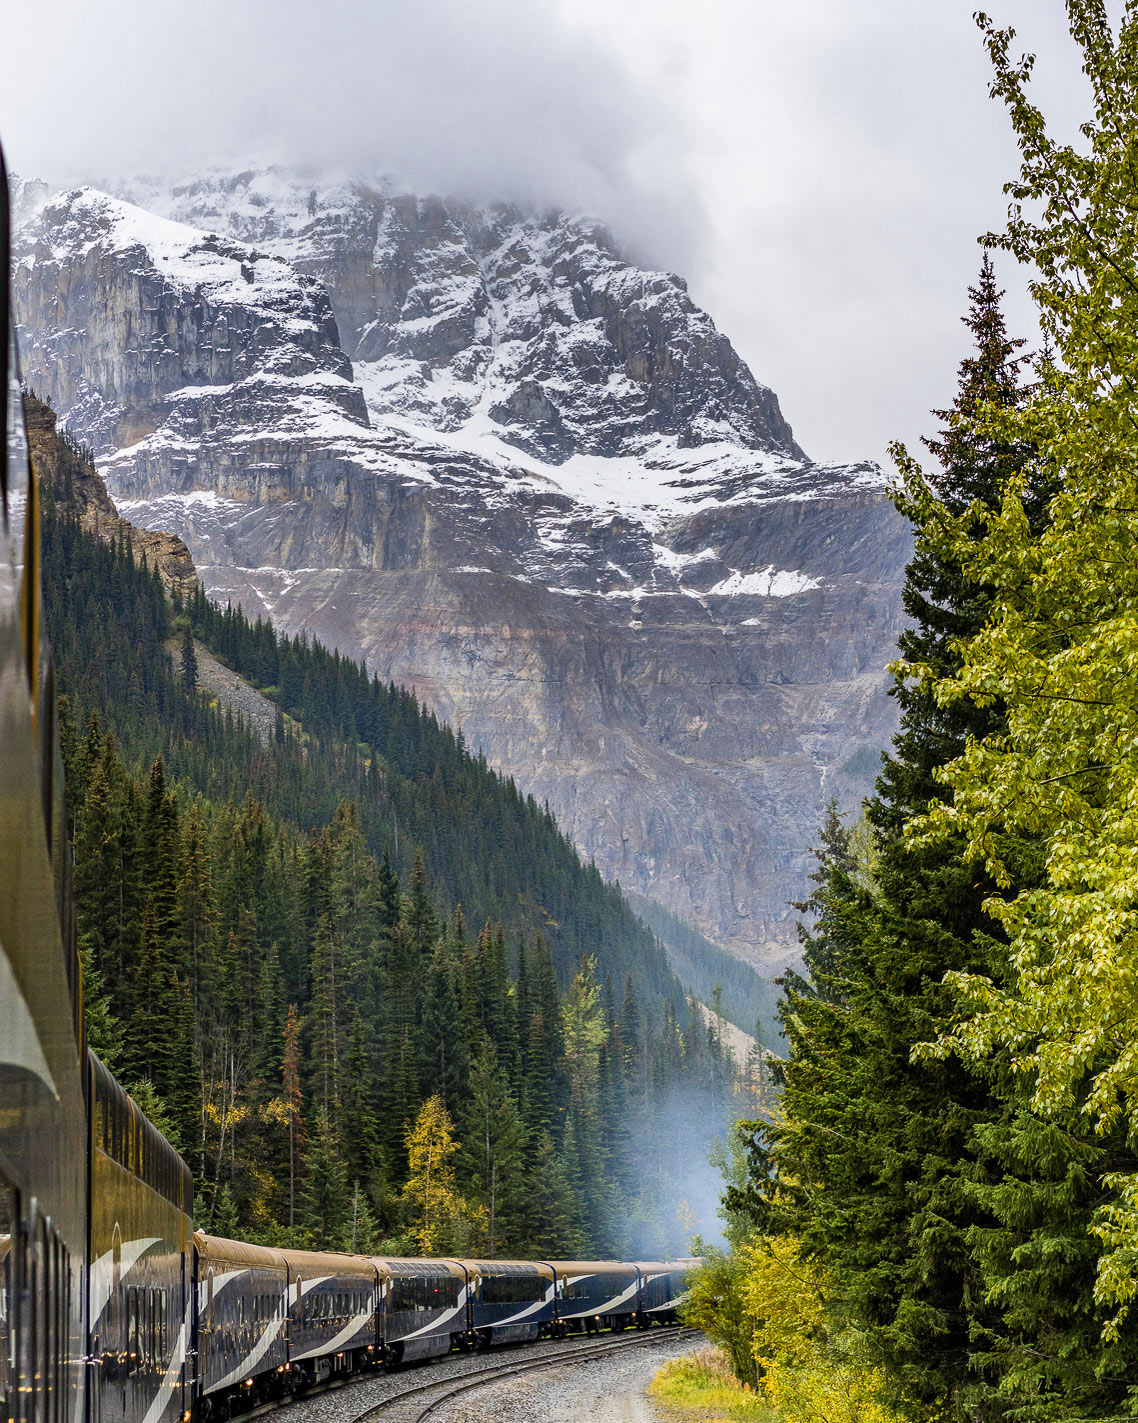 High-end train travel: Train going through mountains and forests.